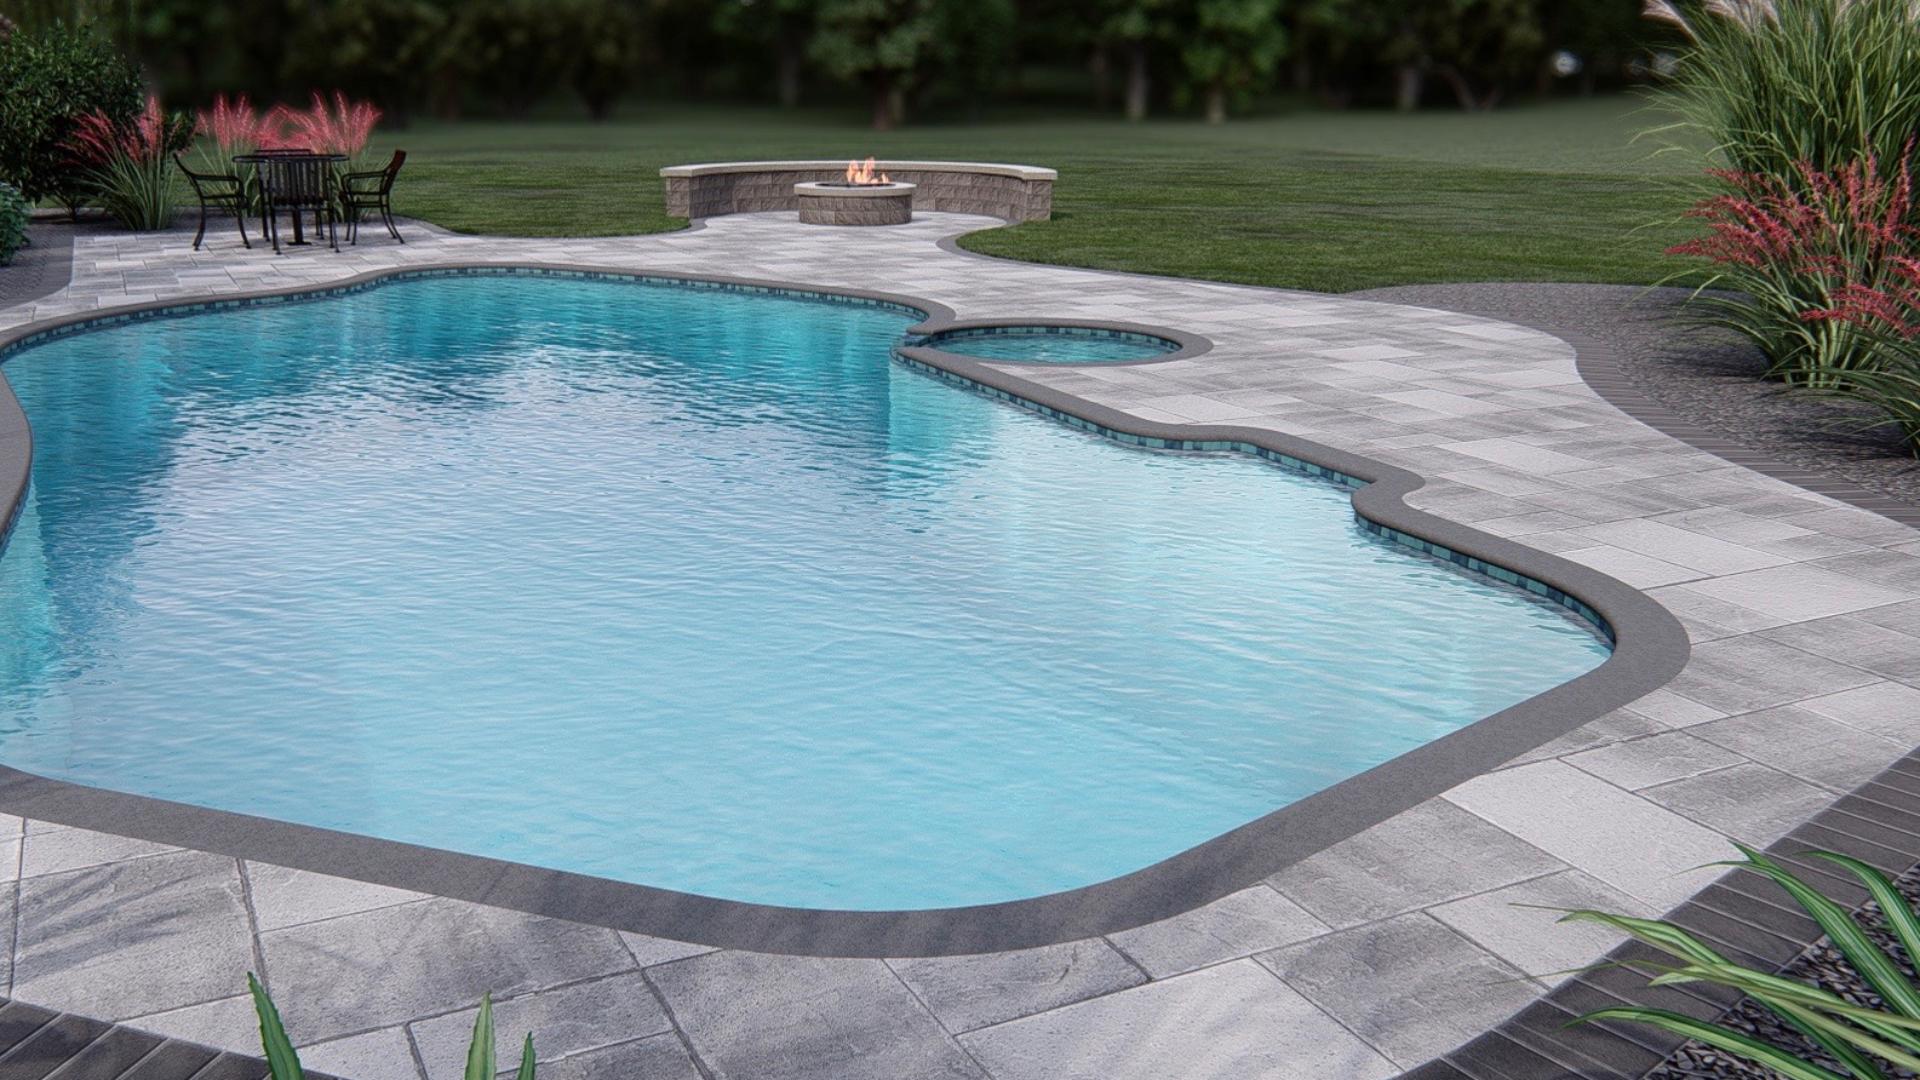 Description3D rendering design of a swimming pool in Easton, PA.